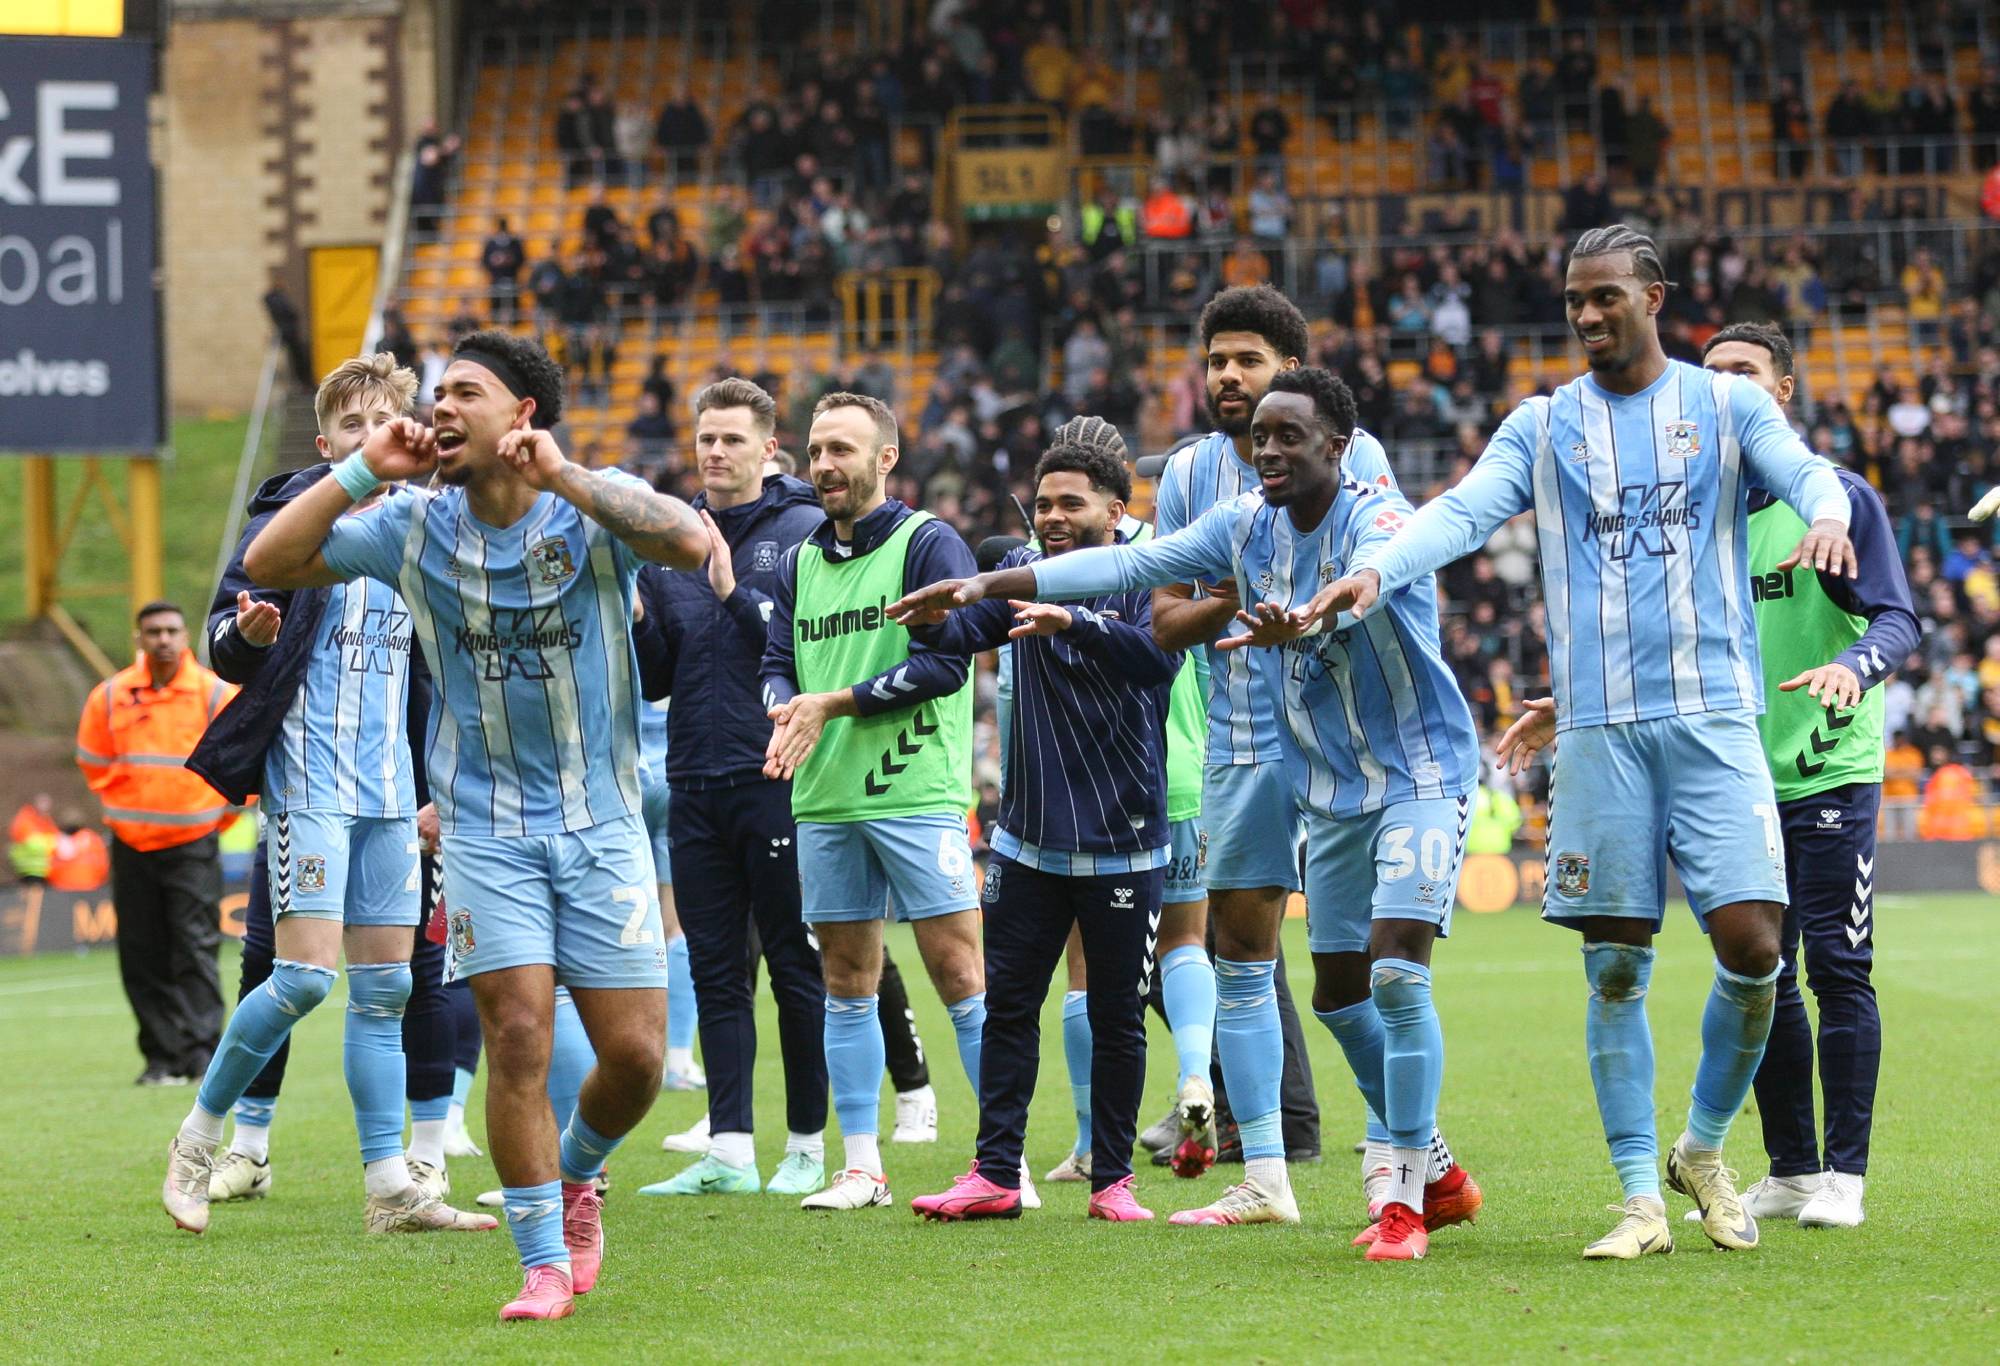 Coventry City players are celebrating after the game during the FA Cup Quarter Final match between Wolverhampton Wanderers and Coventry City at Molineux in Wolverhampton, on March 16, 2024. (Photo by MI News/NurPhoto via Getty Images)